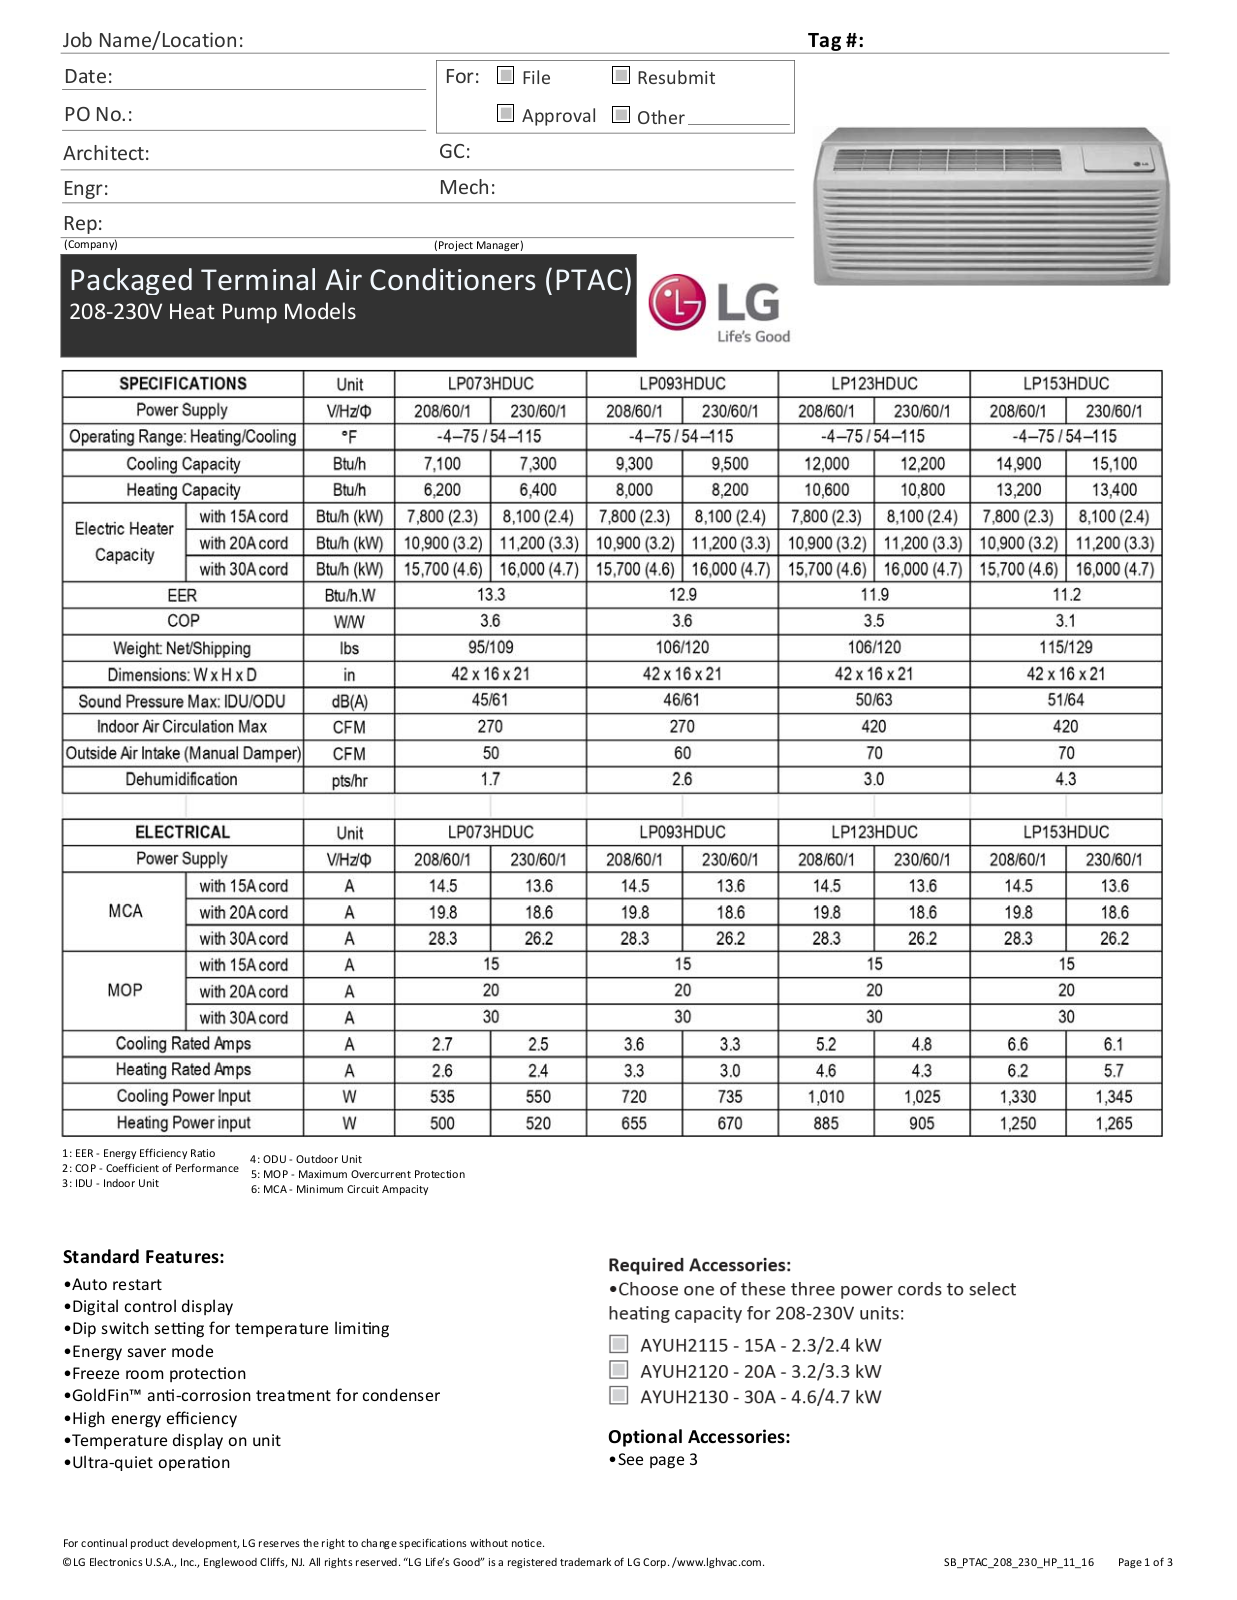 LG LP153HDUC Specifications